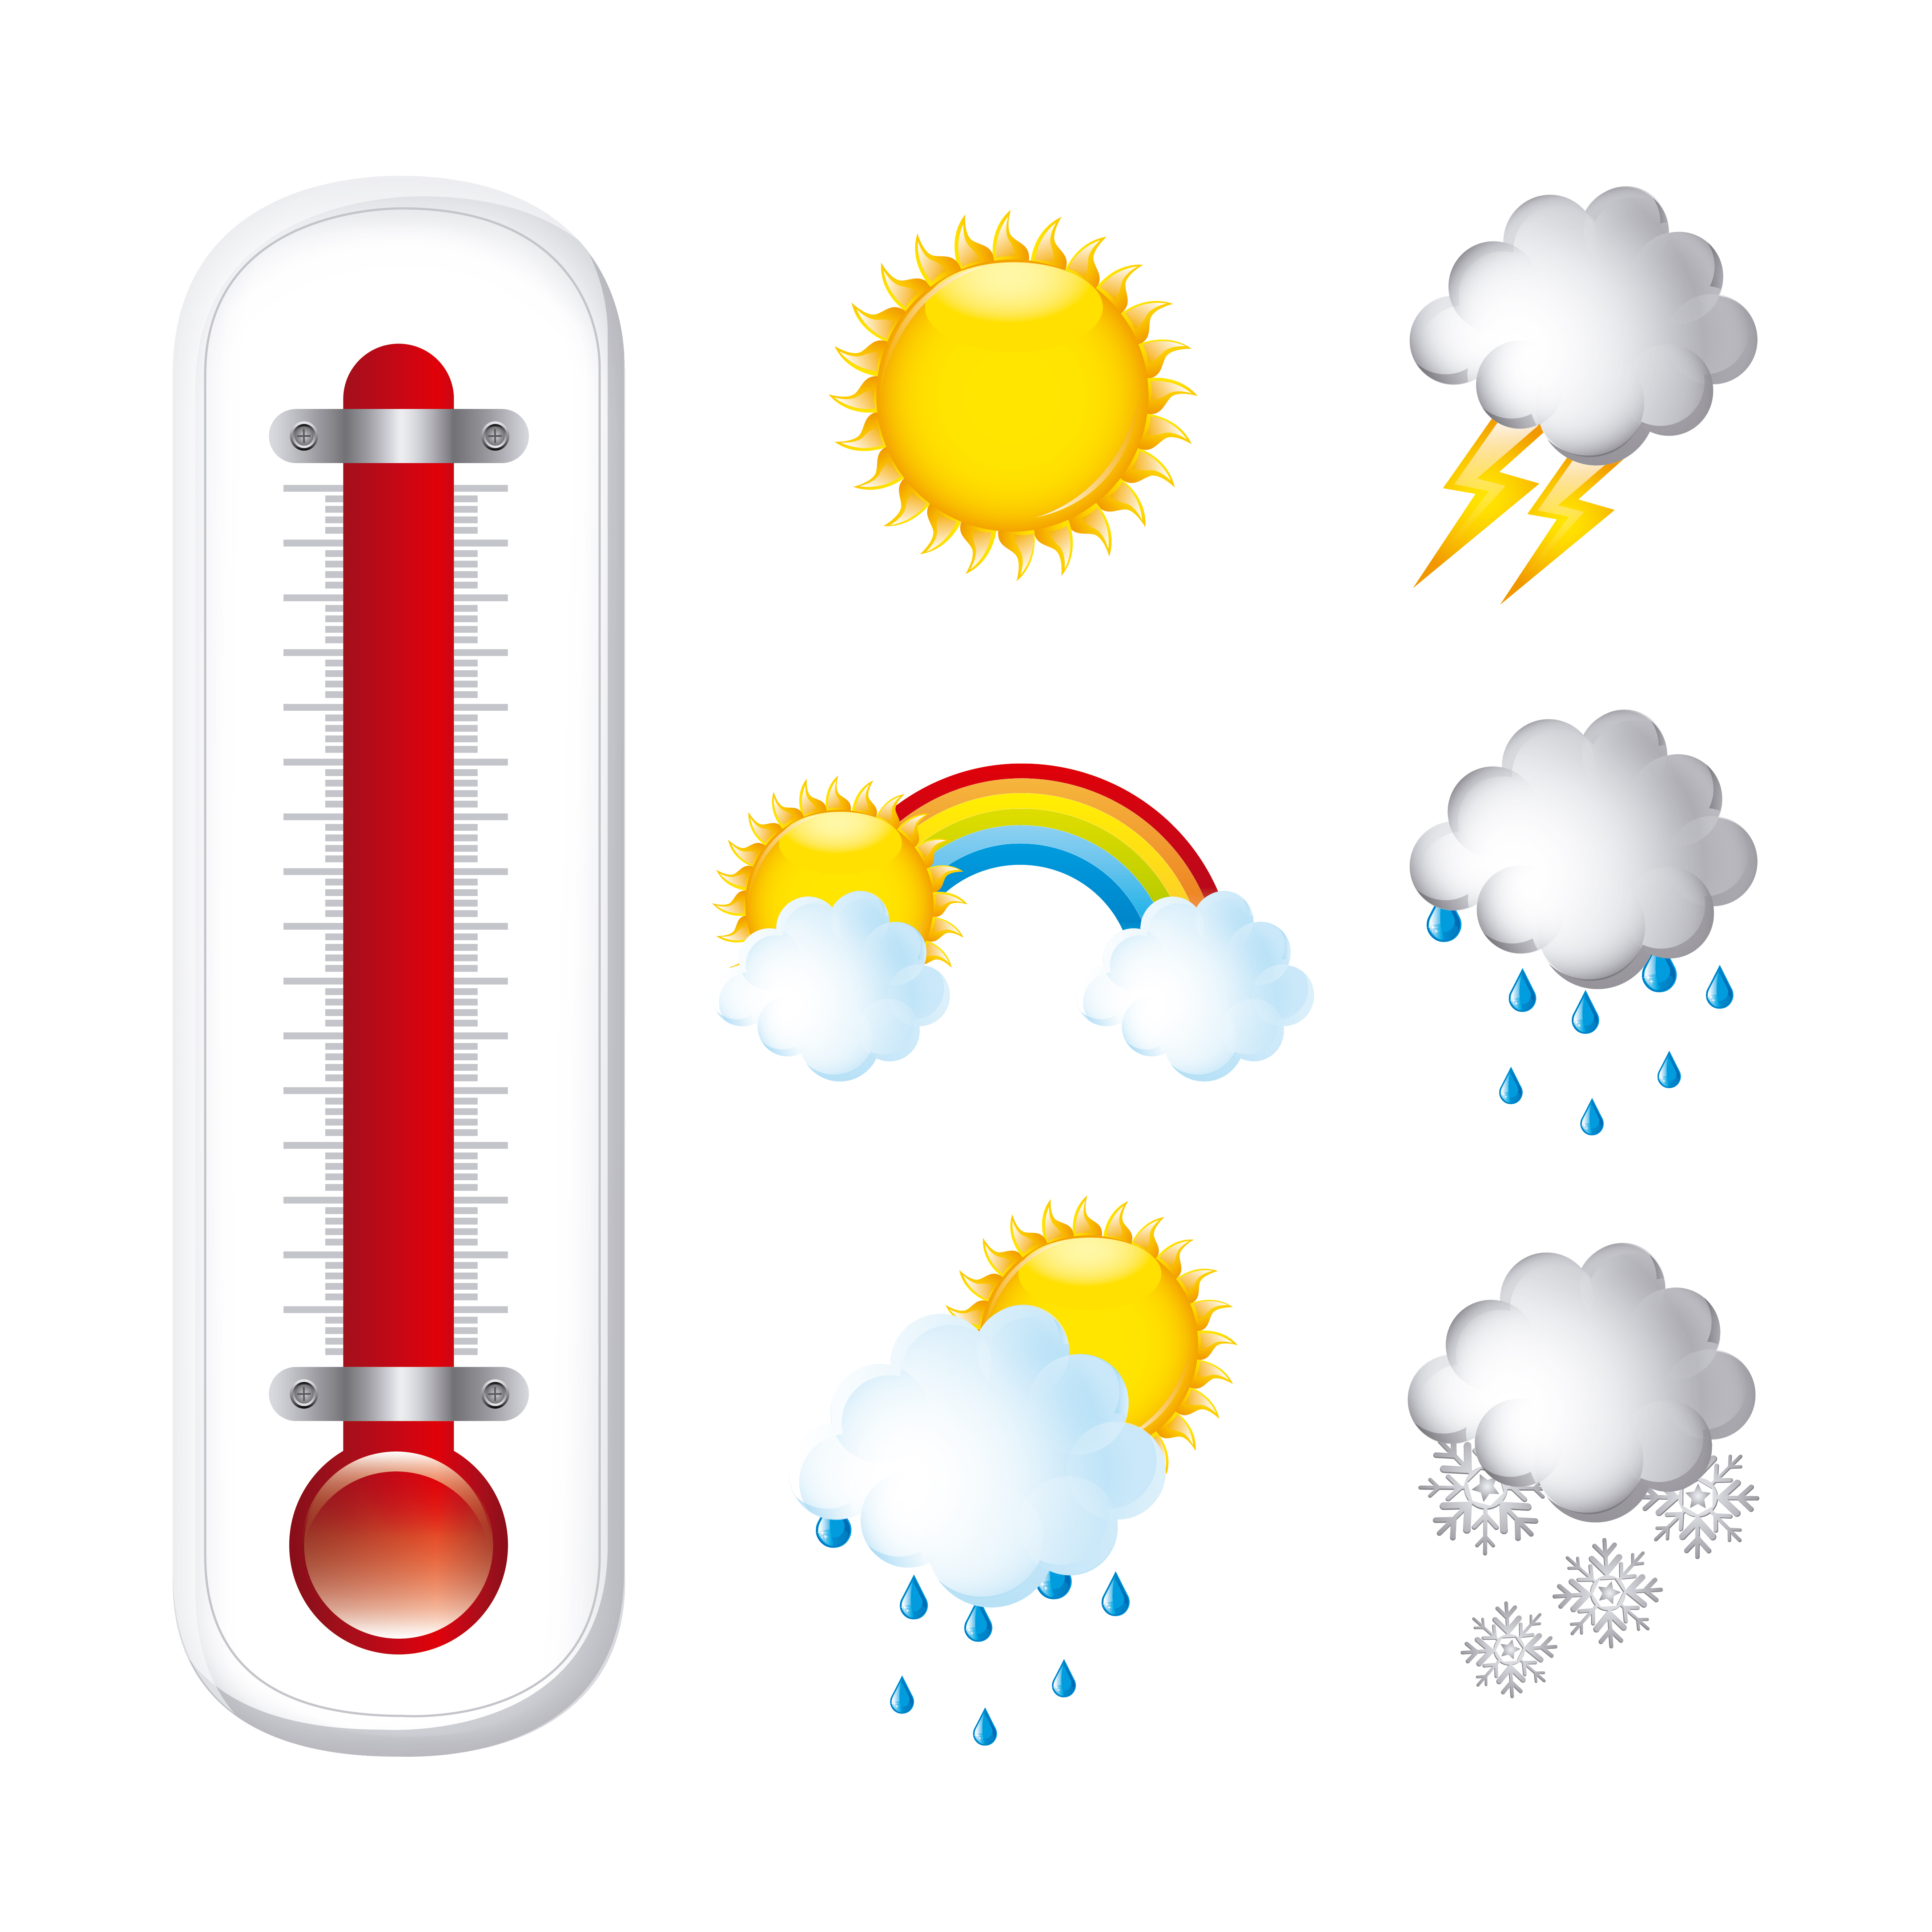 Download Weather icon pack - Download Free Vectors, Clipart ...